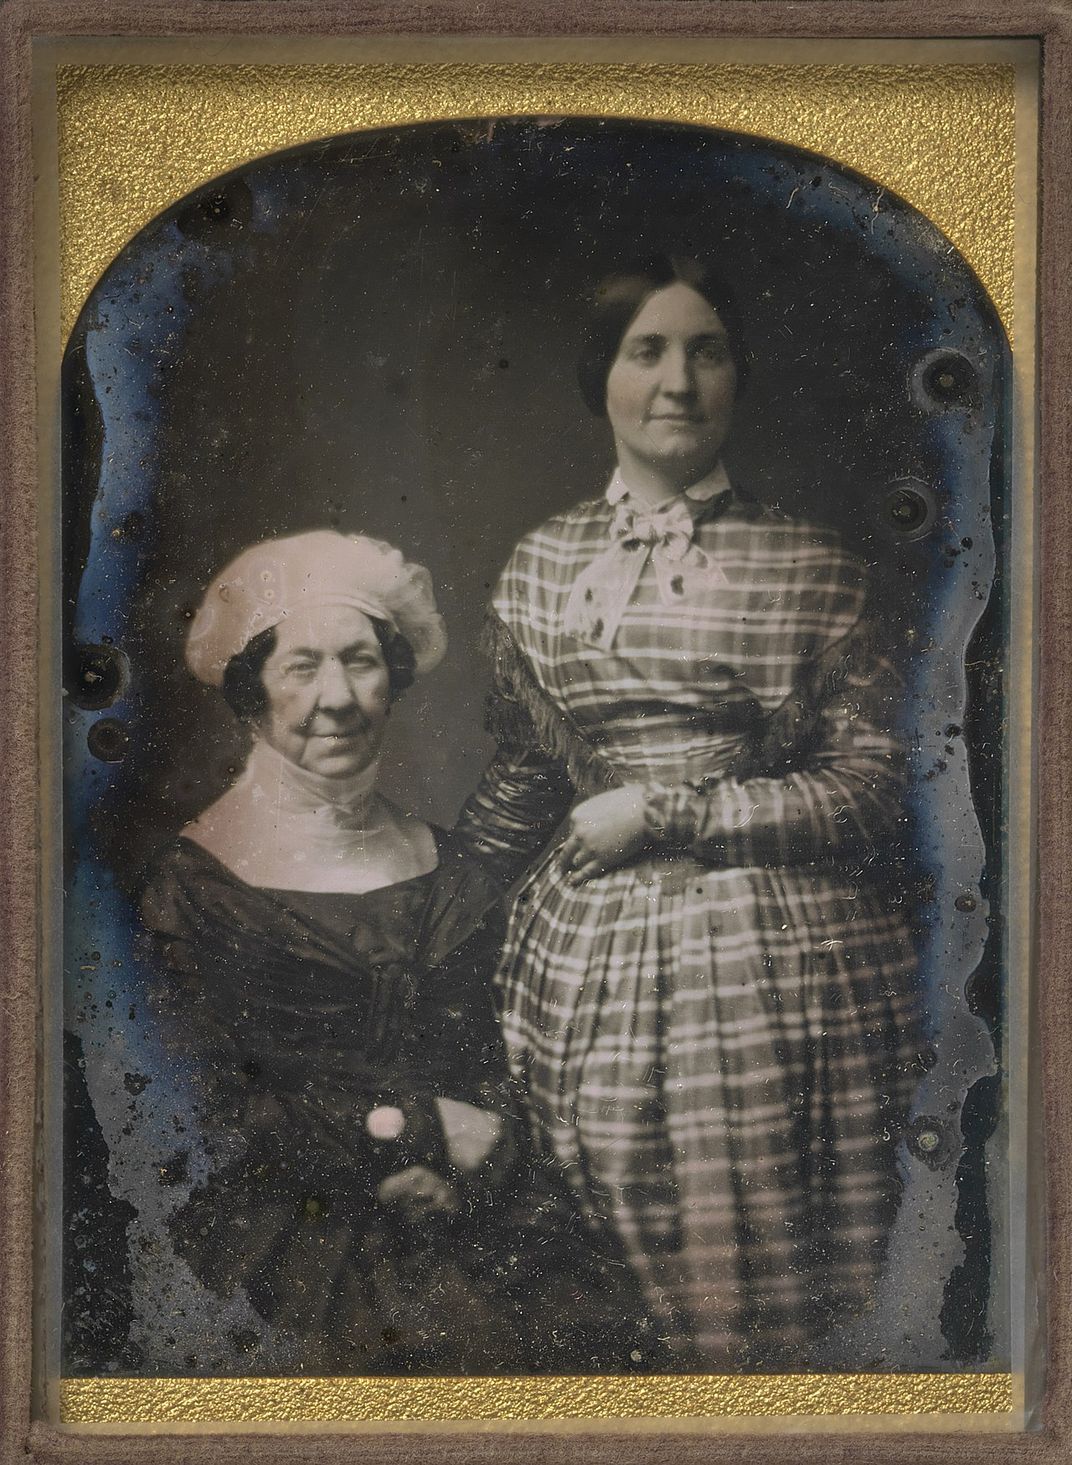 An 1848 daguerreotype of Dolley and her niece